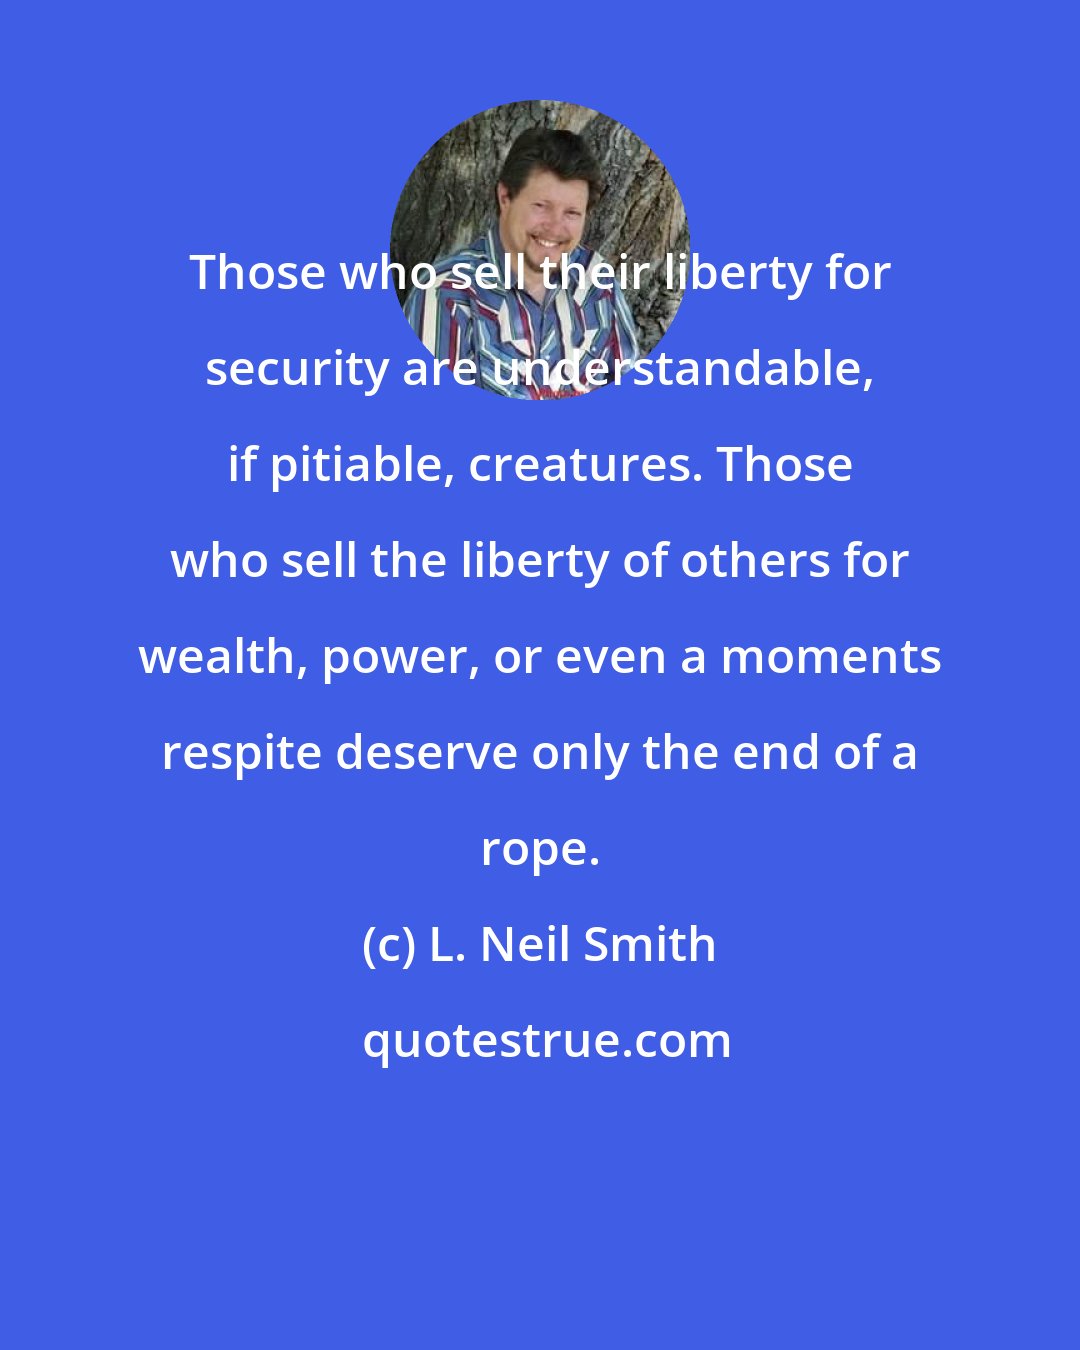 L. Neil Smith: Those who sell their liberty for security are understandable, if pitiable, creatures. Those who sell the liberty of others for wealth, power, or even a moments respite deserve only the end of a rope.